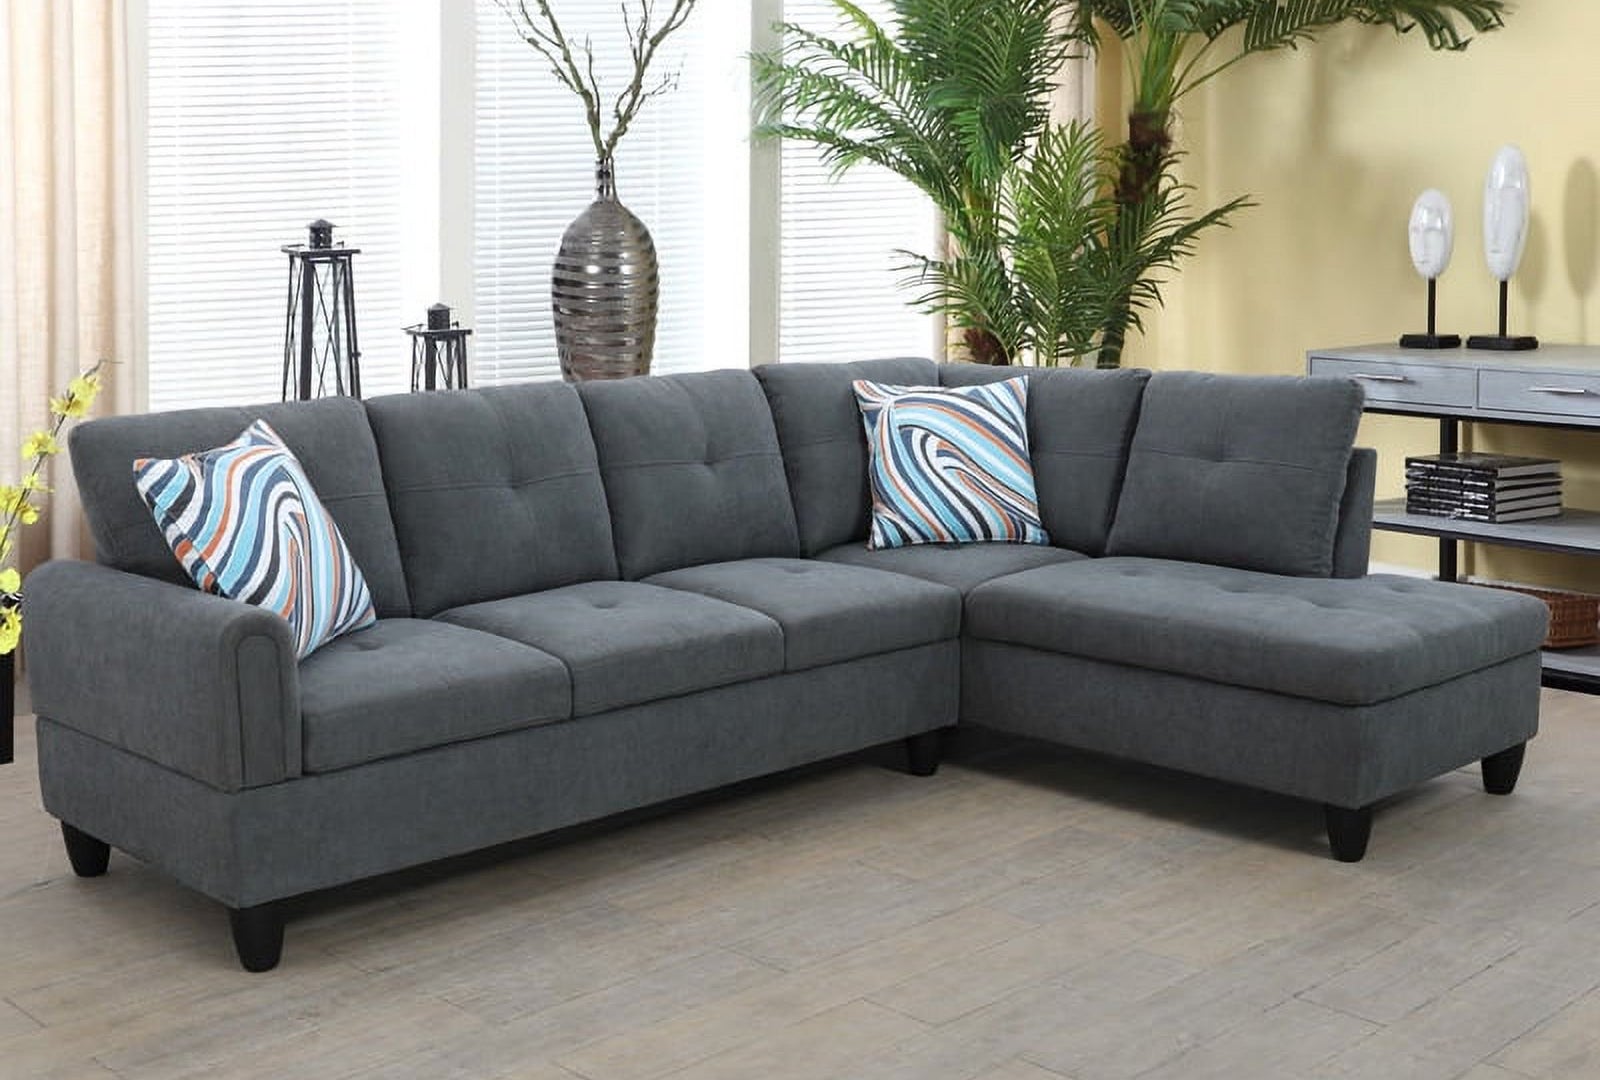 the sectional in a living room